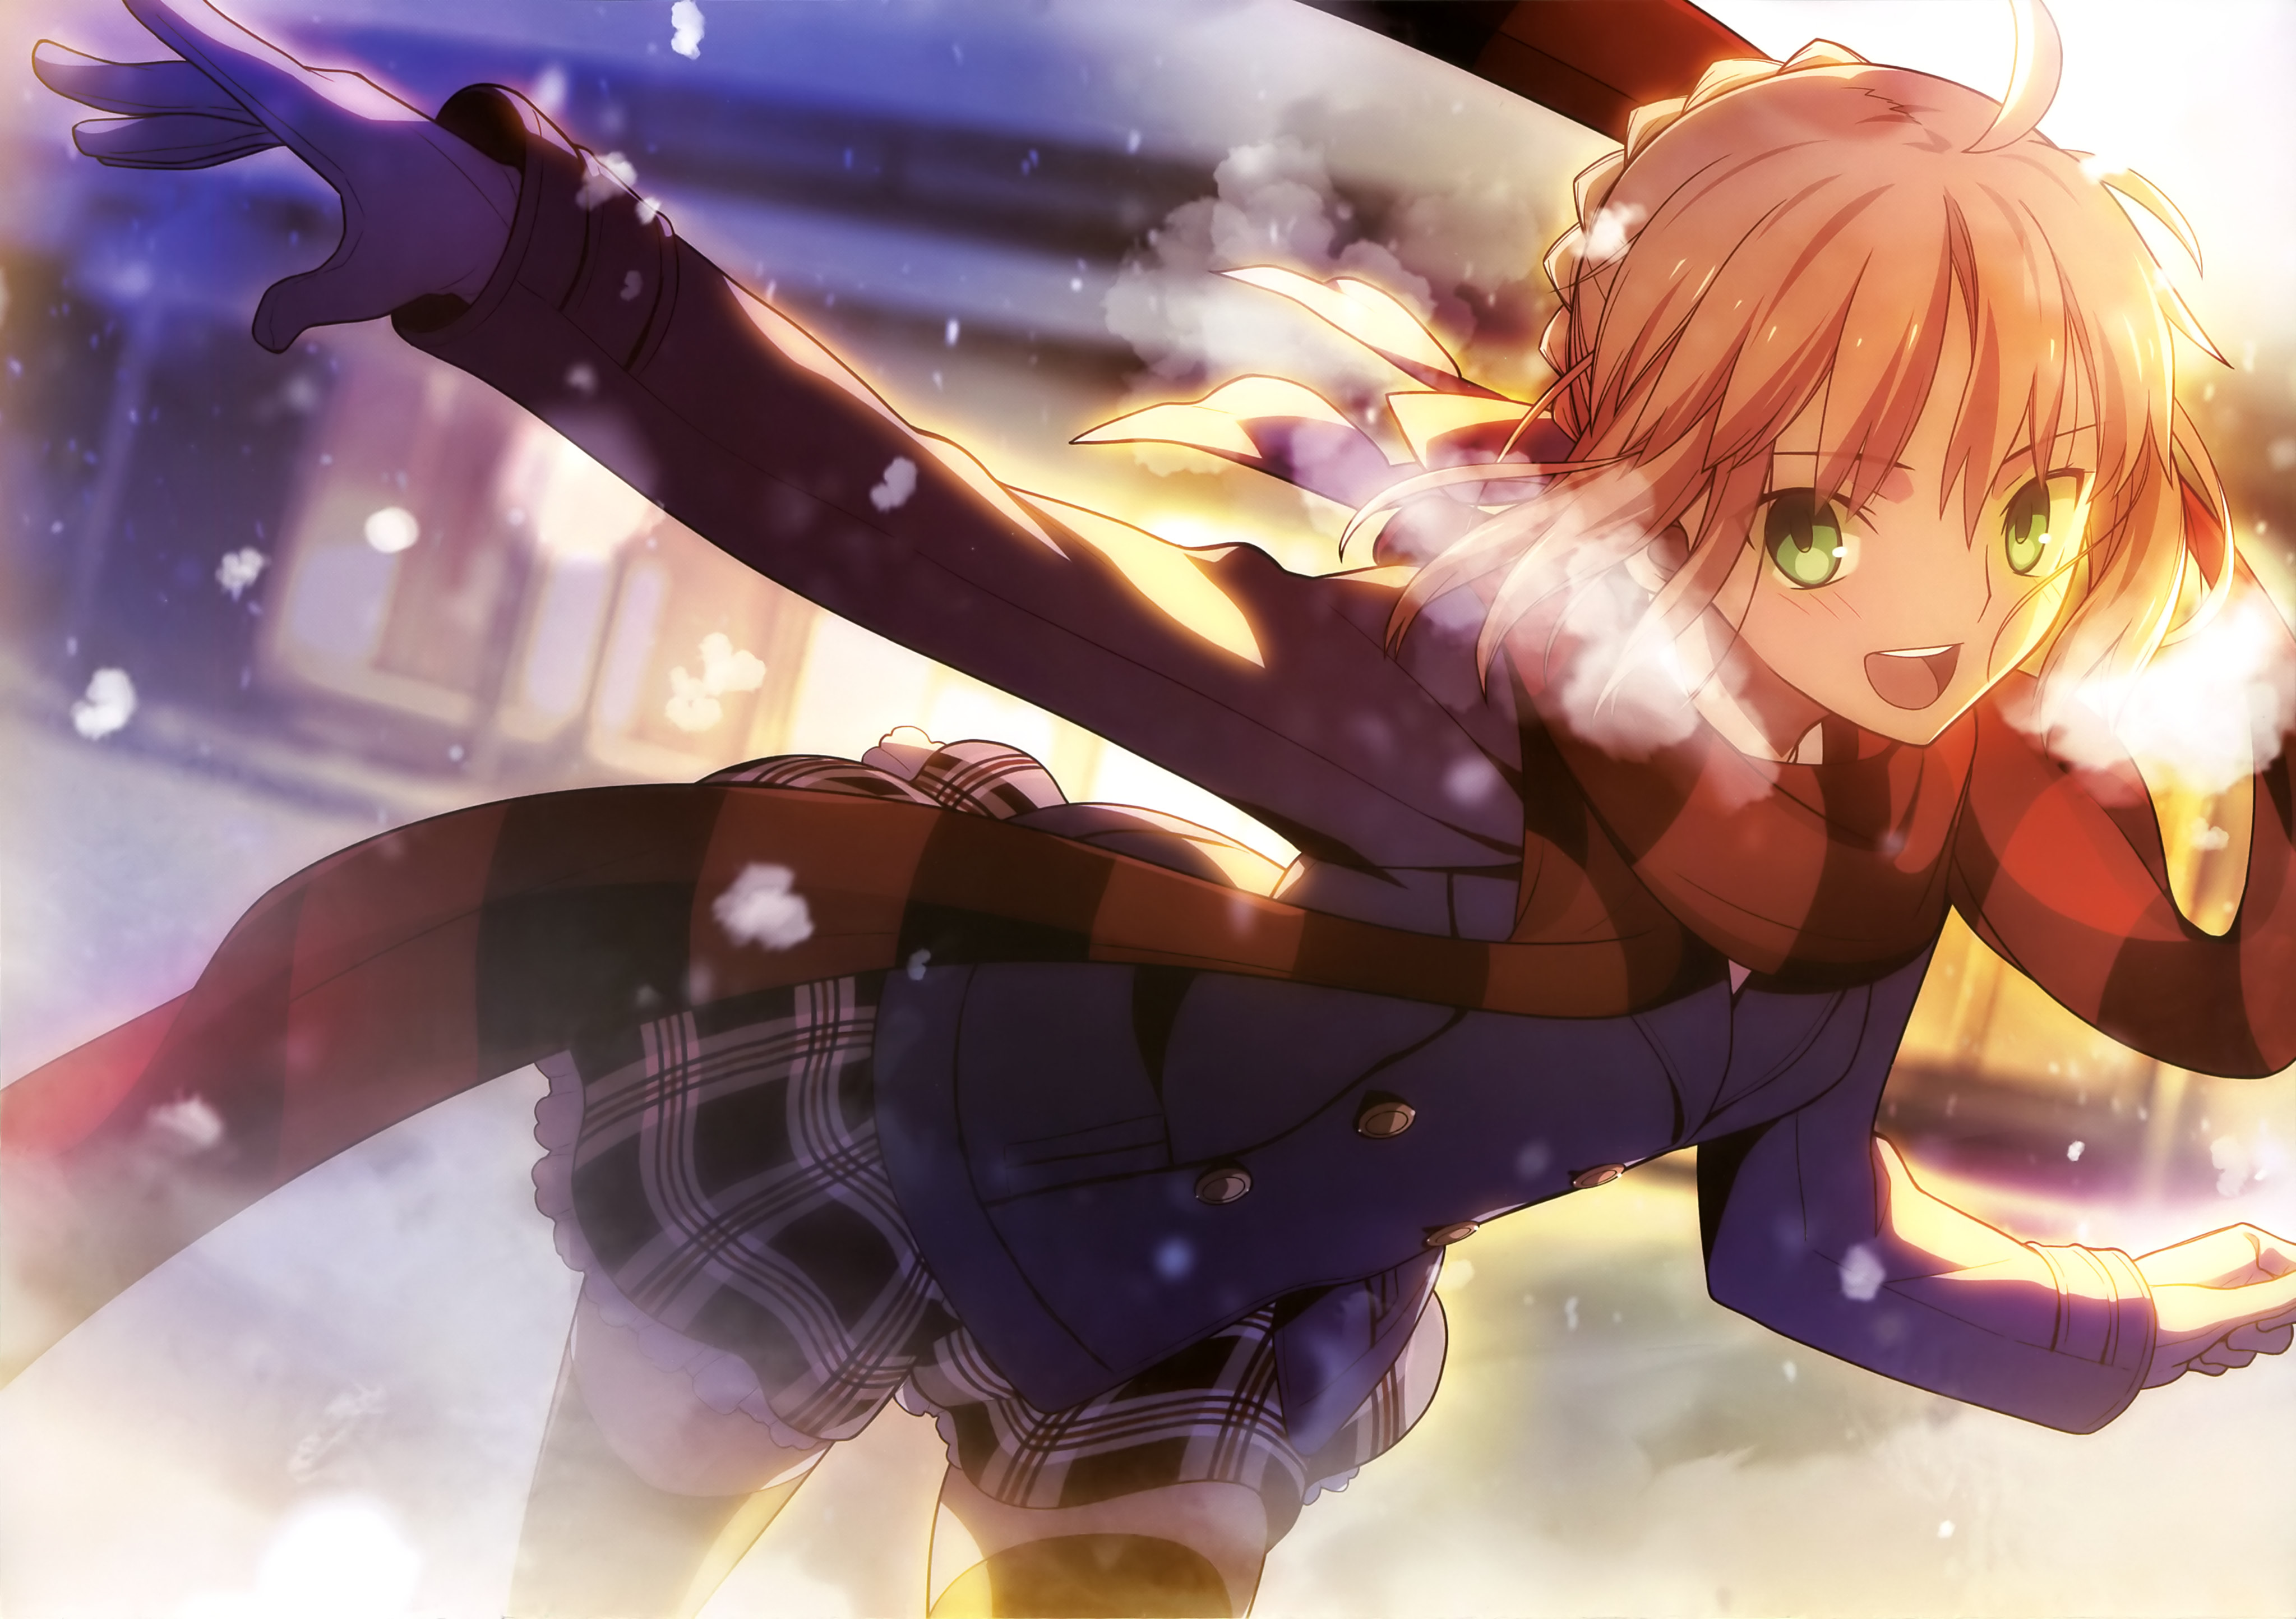  Fate Series HQ Background Images